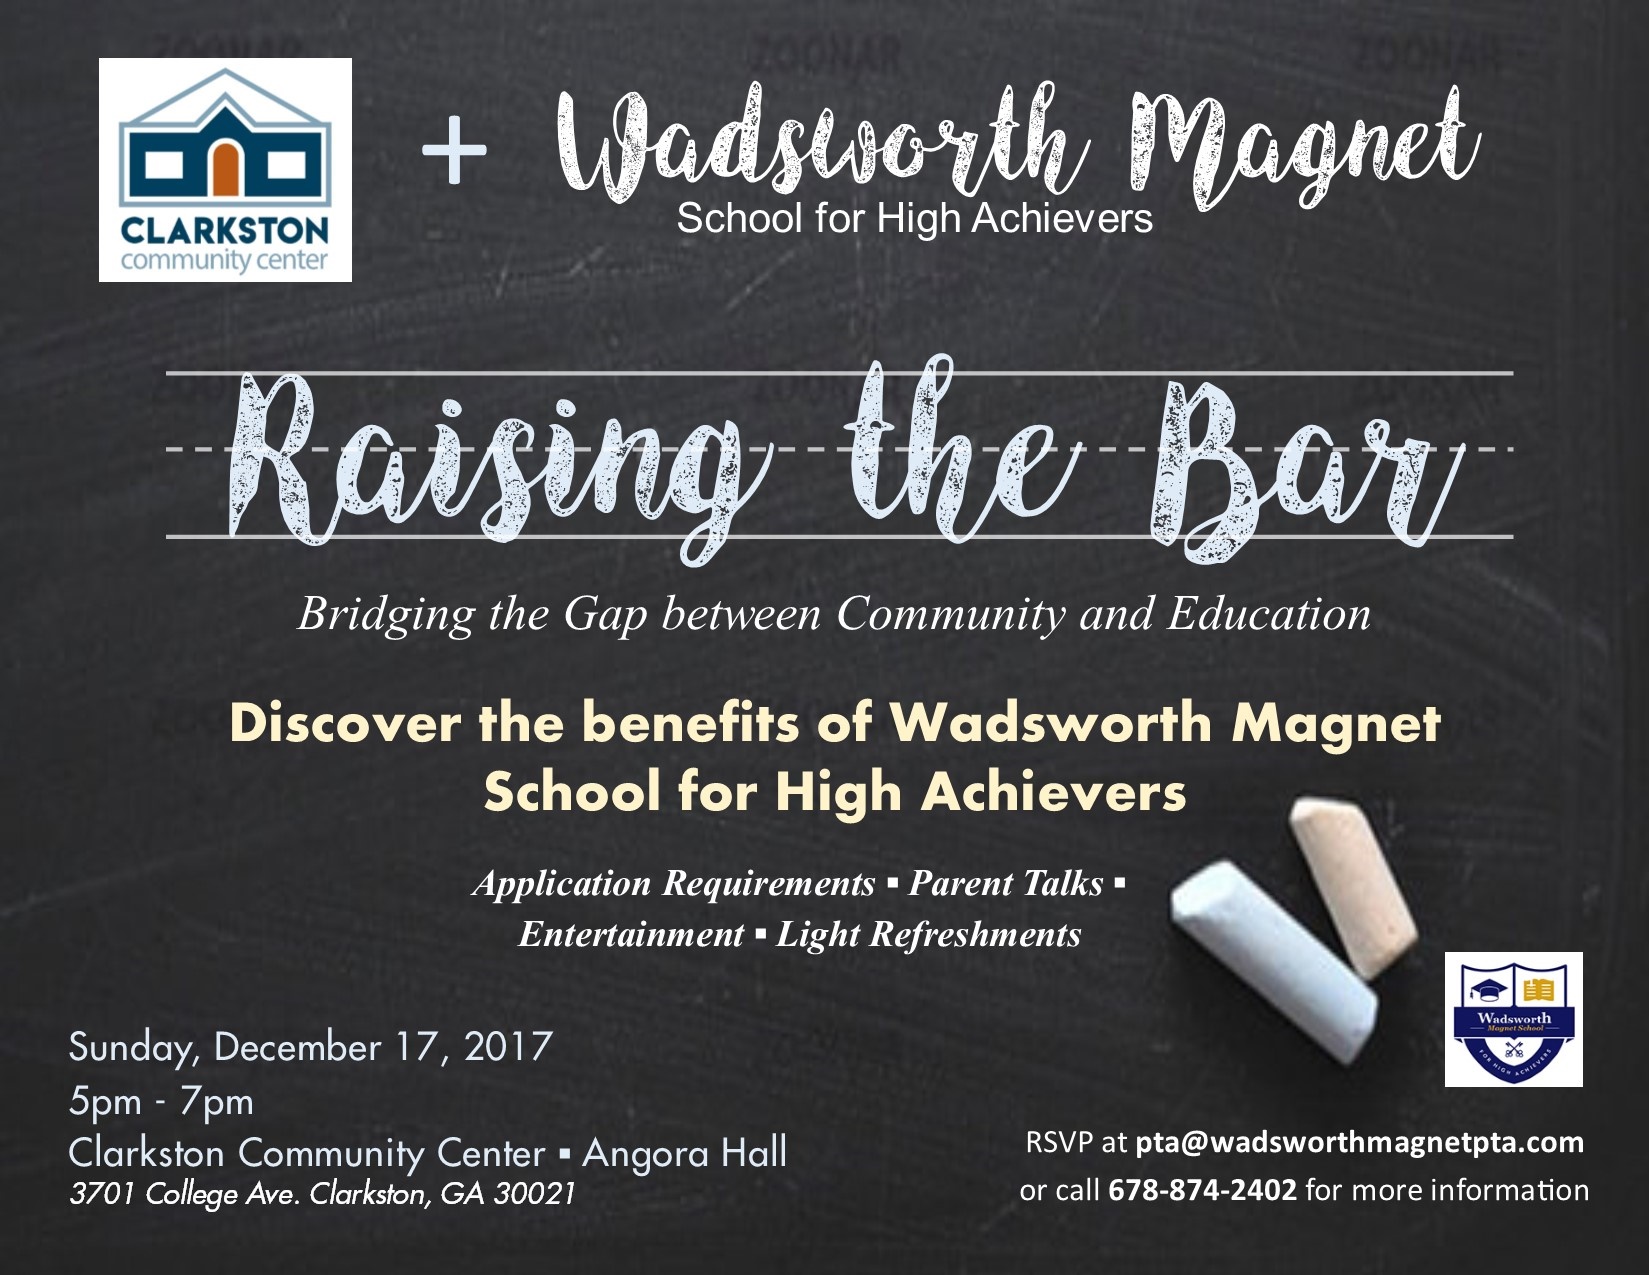 Wadsworth Magnet School Partners with the Clarkston Community Center to Bridge the Gap Between Community and Education